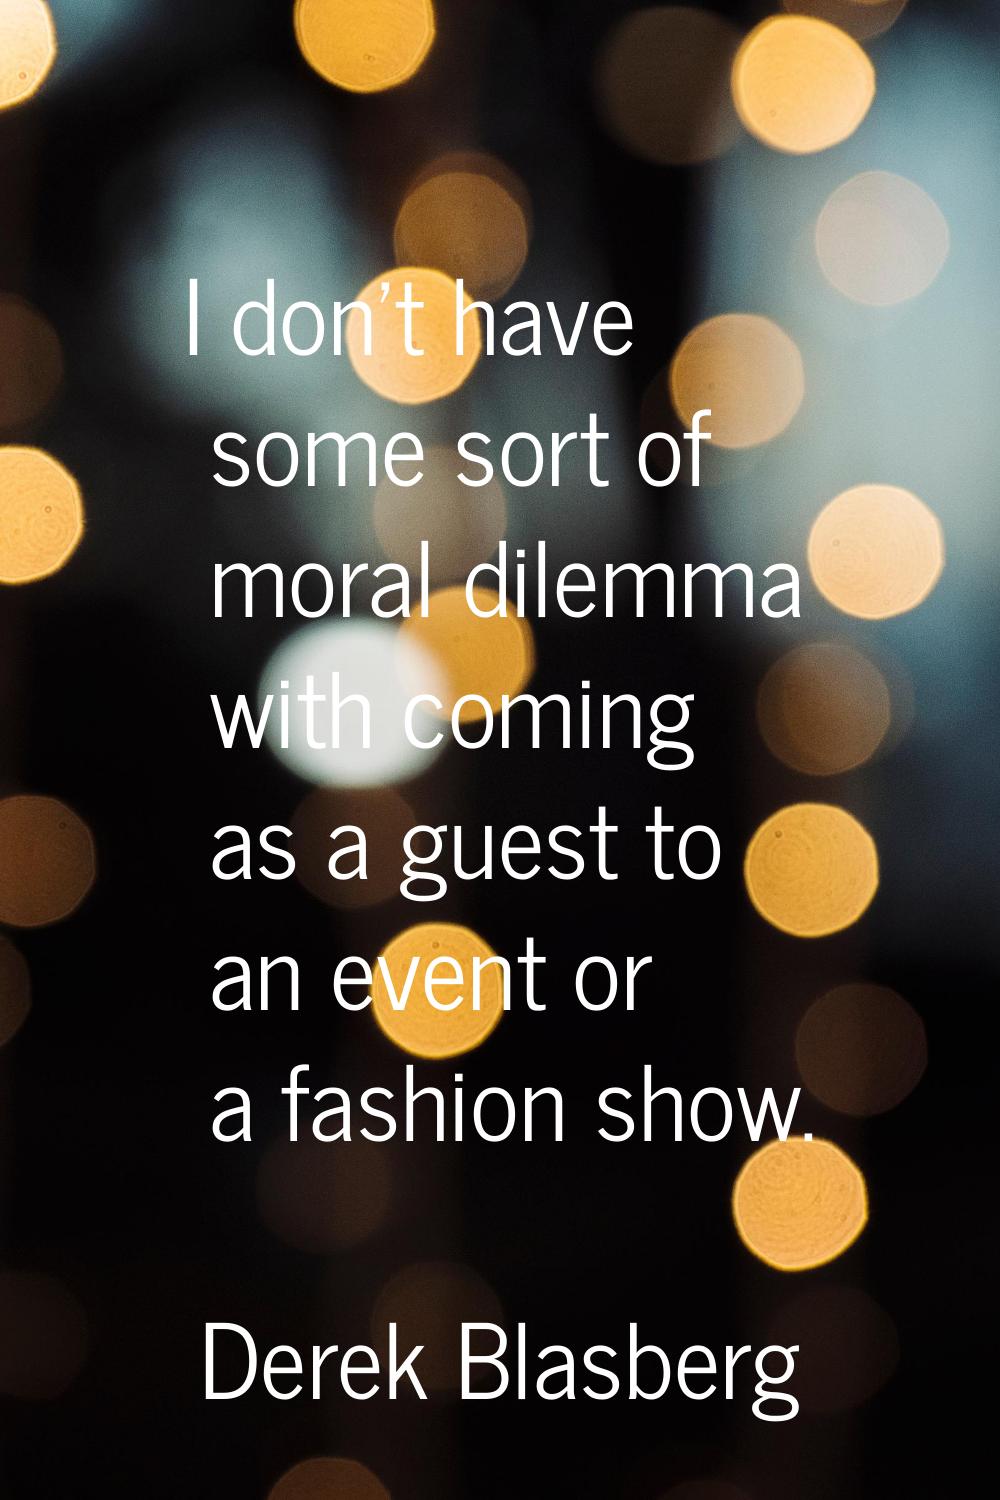 I don't have some sort of moral dilemma with coming as a guest to an event or a fashion show.